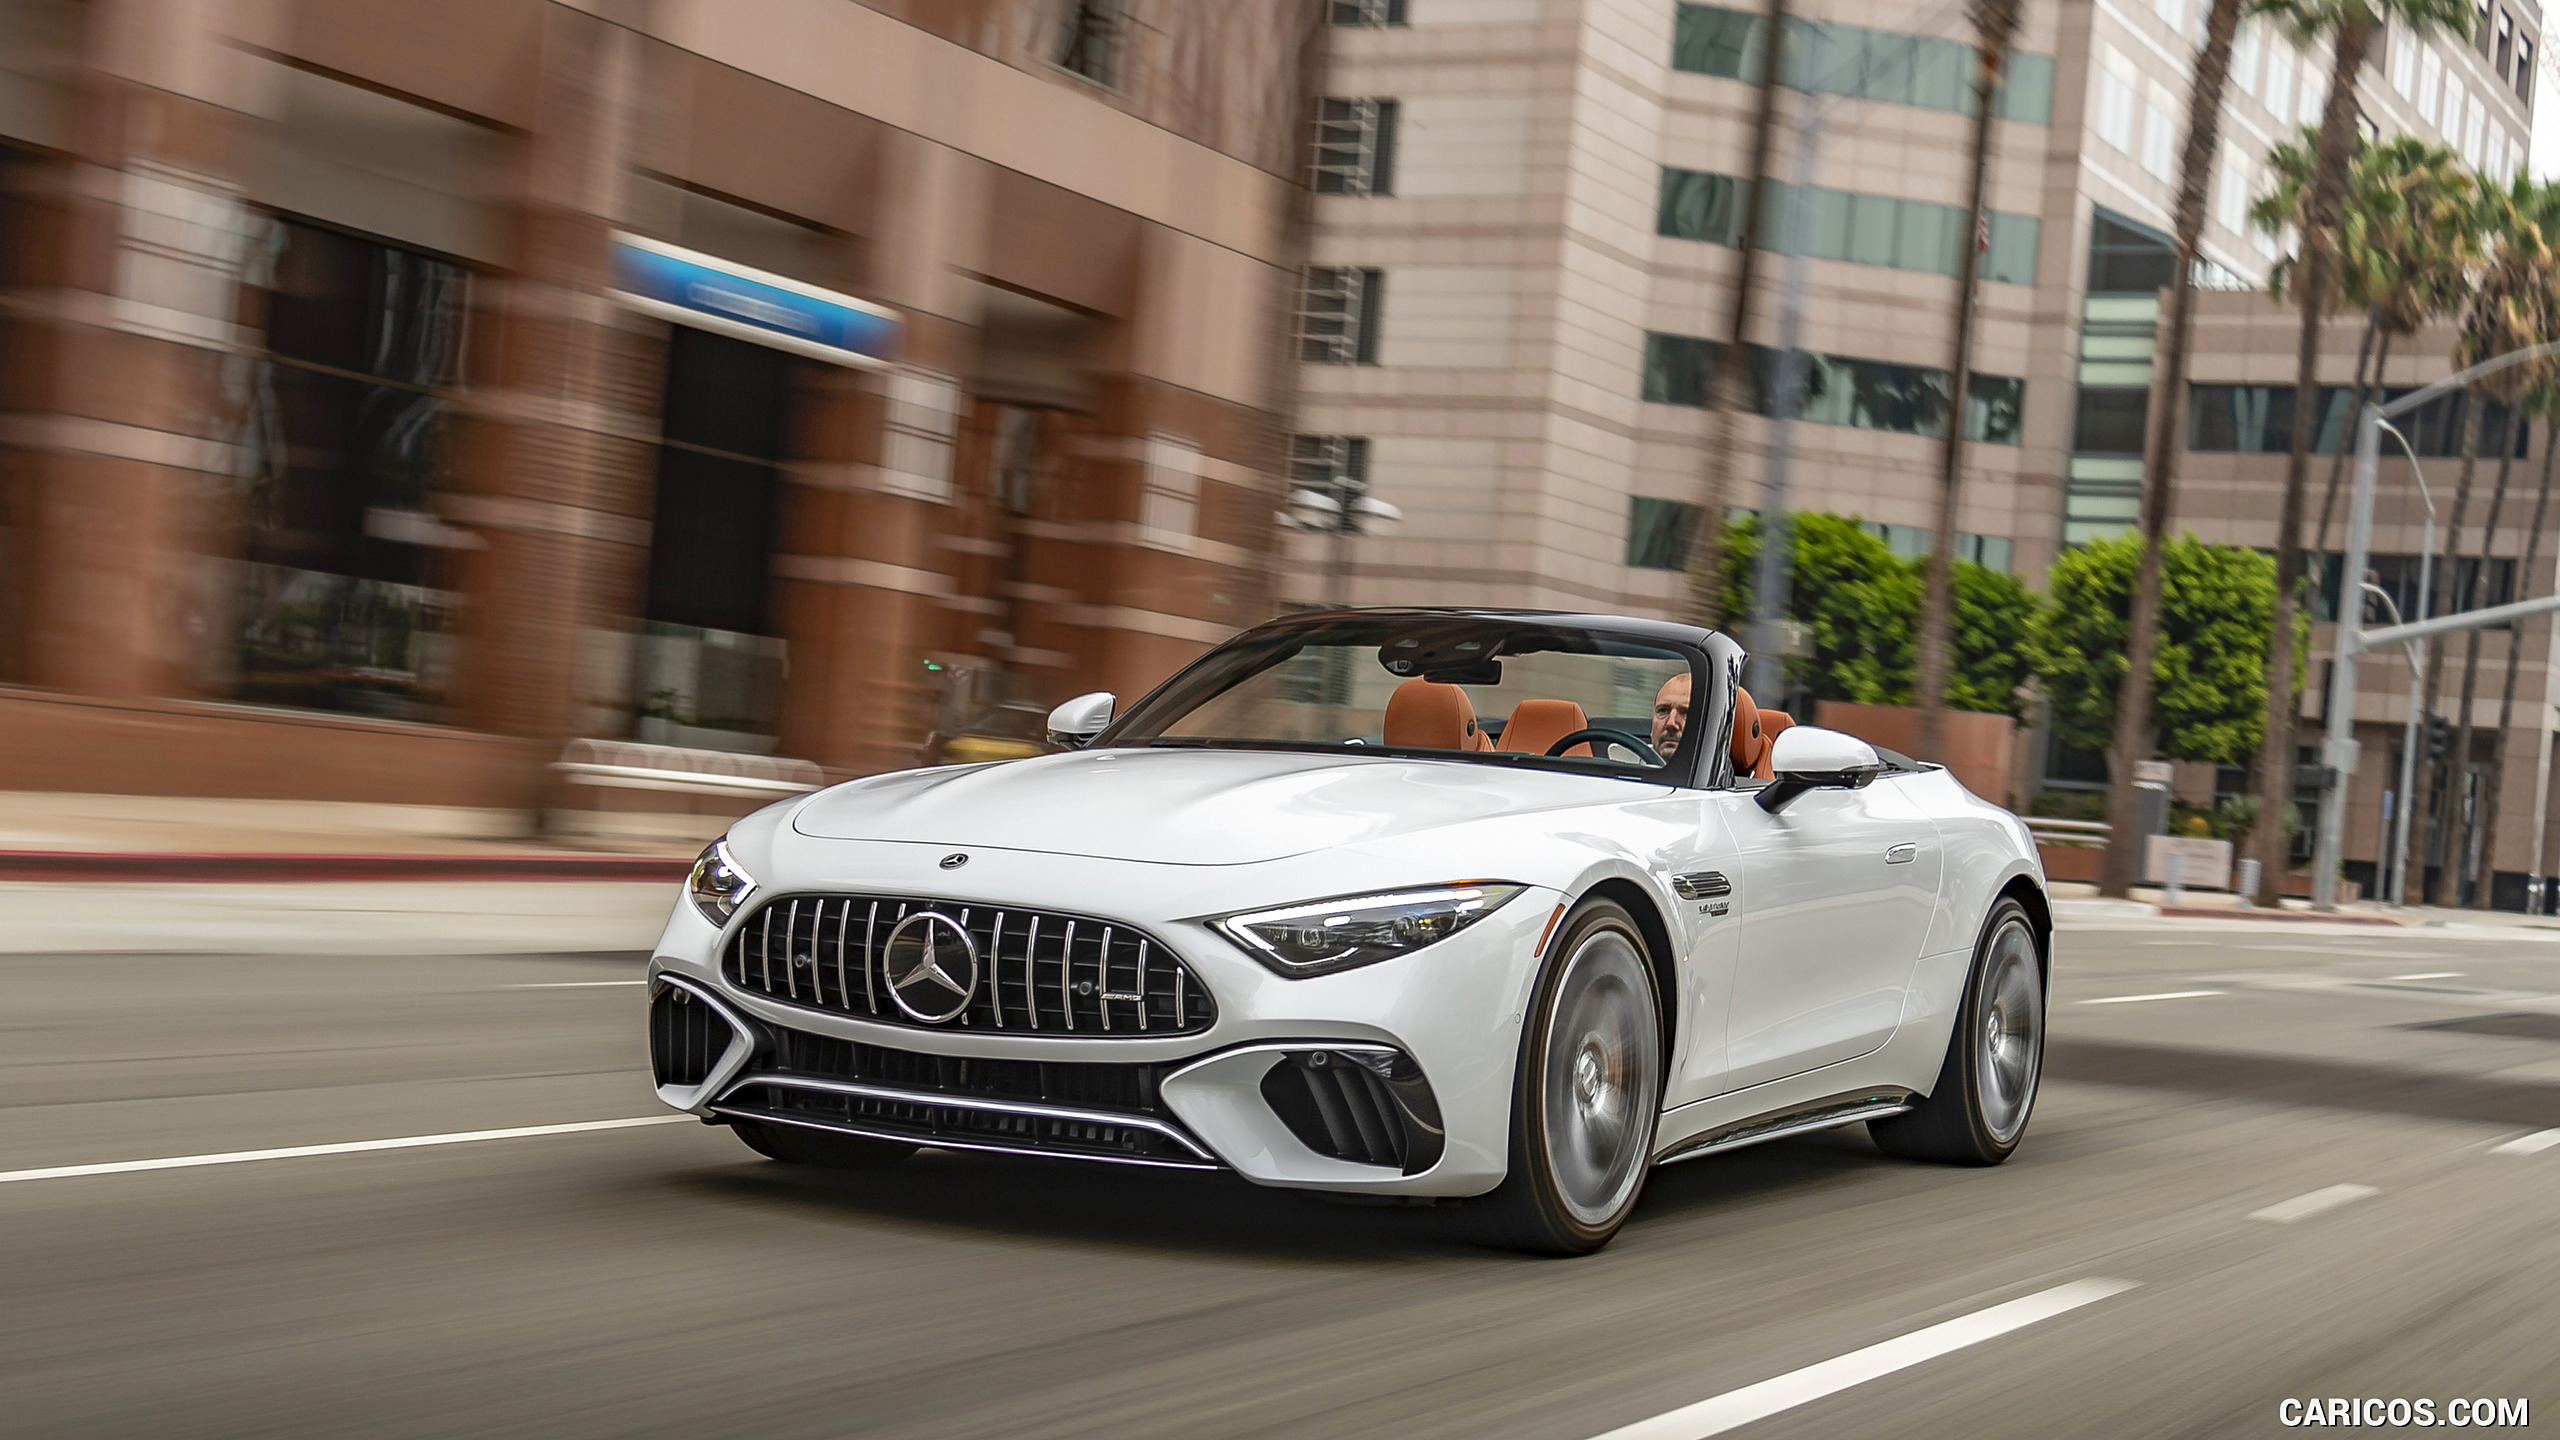 2022 Mercedes-AMG SL 55 4MATIC+ (Color: Opalith White Bright), #113 of 235